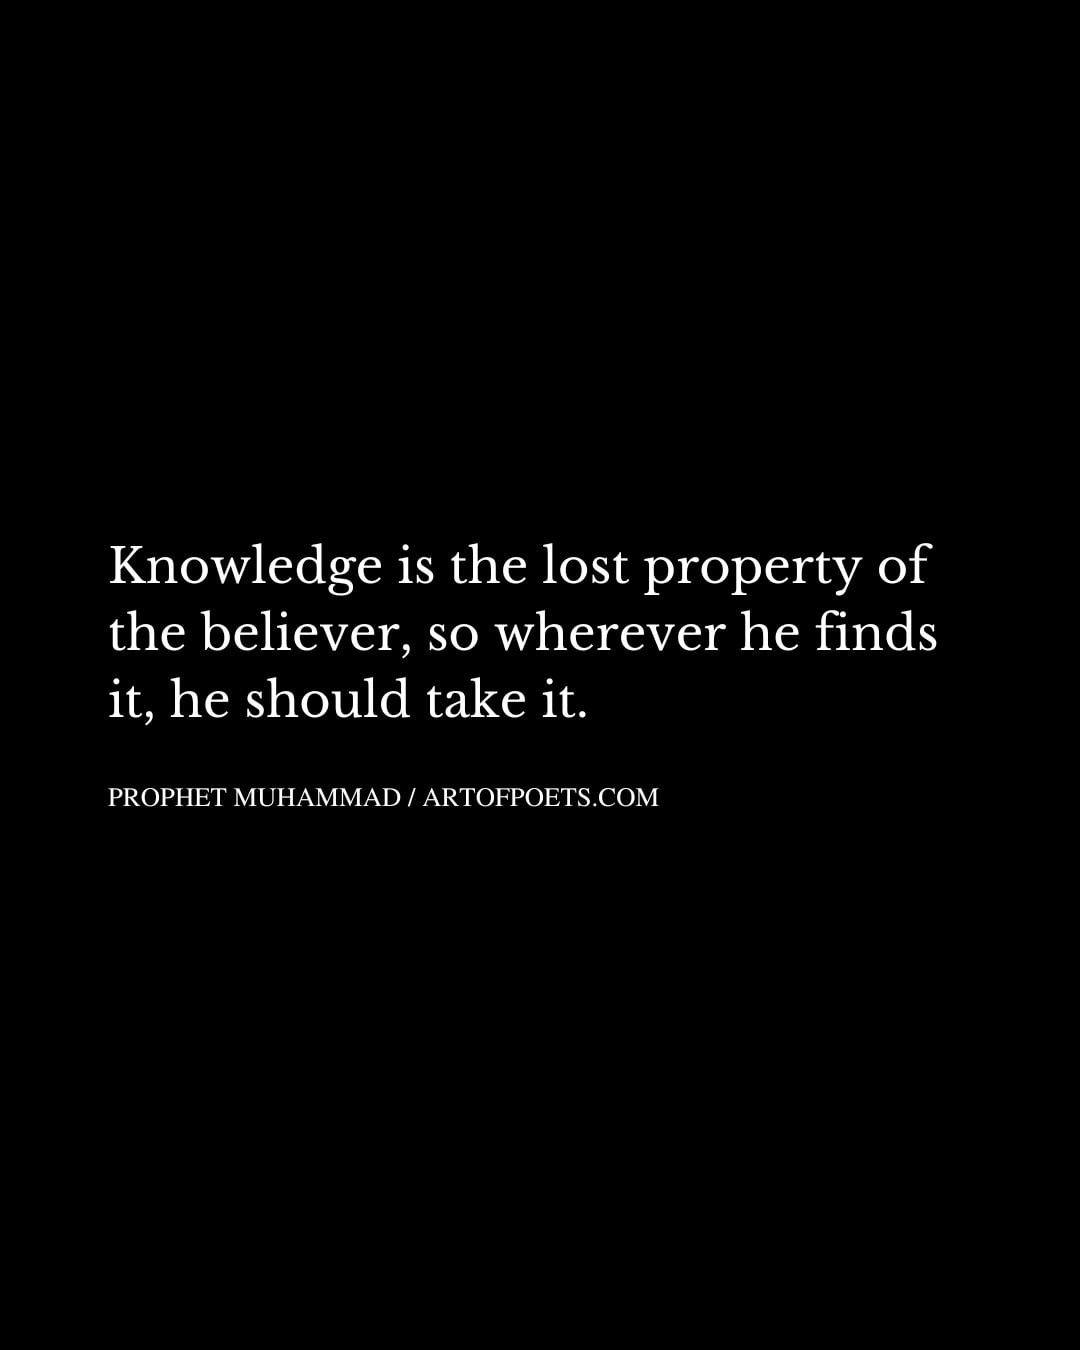 Knowledge is the lost property of the believer so wherever he finds it he should take it